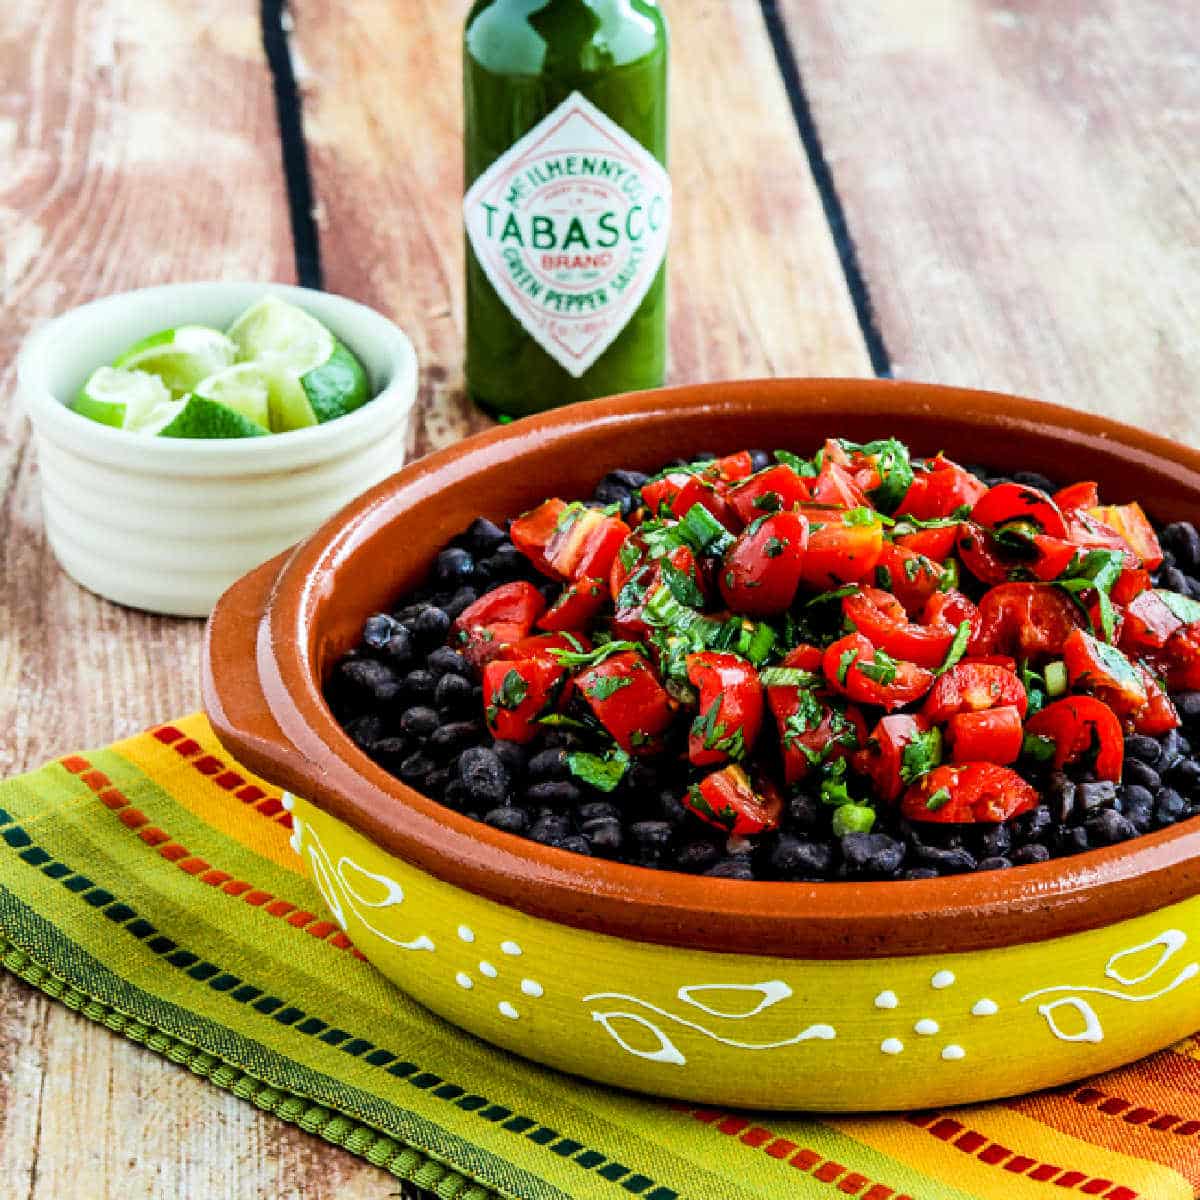 Spicy Black Beans with Cilantro shown in serving bowl with limes and Green Tabasco Sauce.